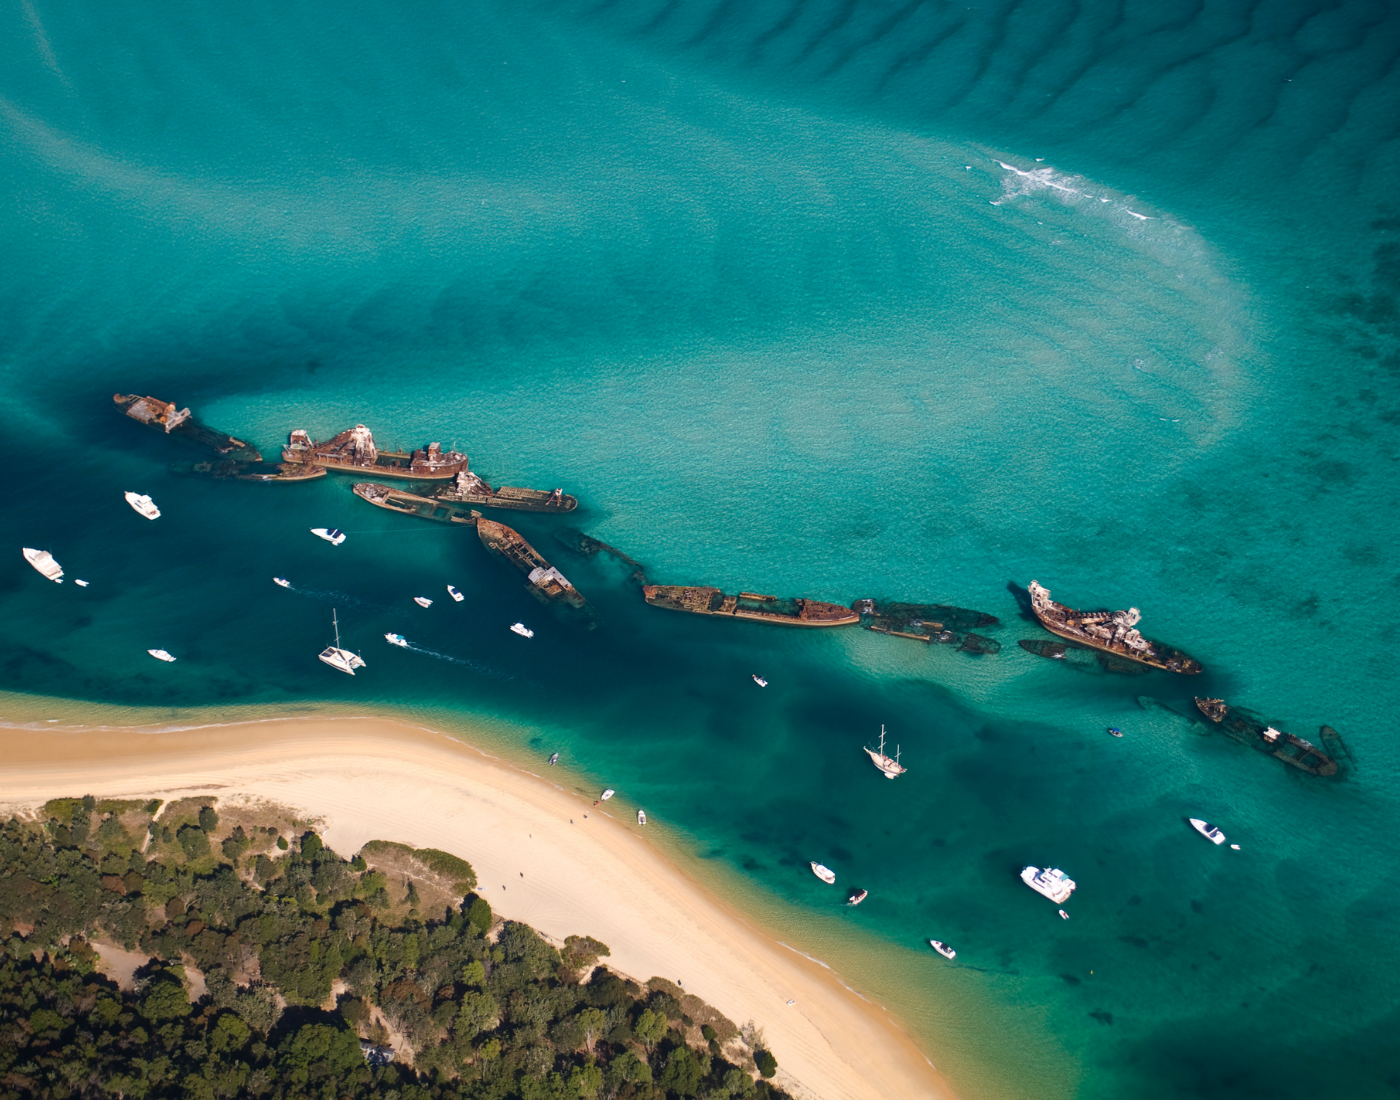 Tour 11 - Tangalooma Shipwrecks Scenic VIP Helicopter Experience